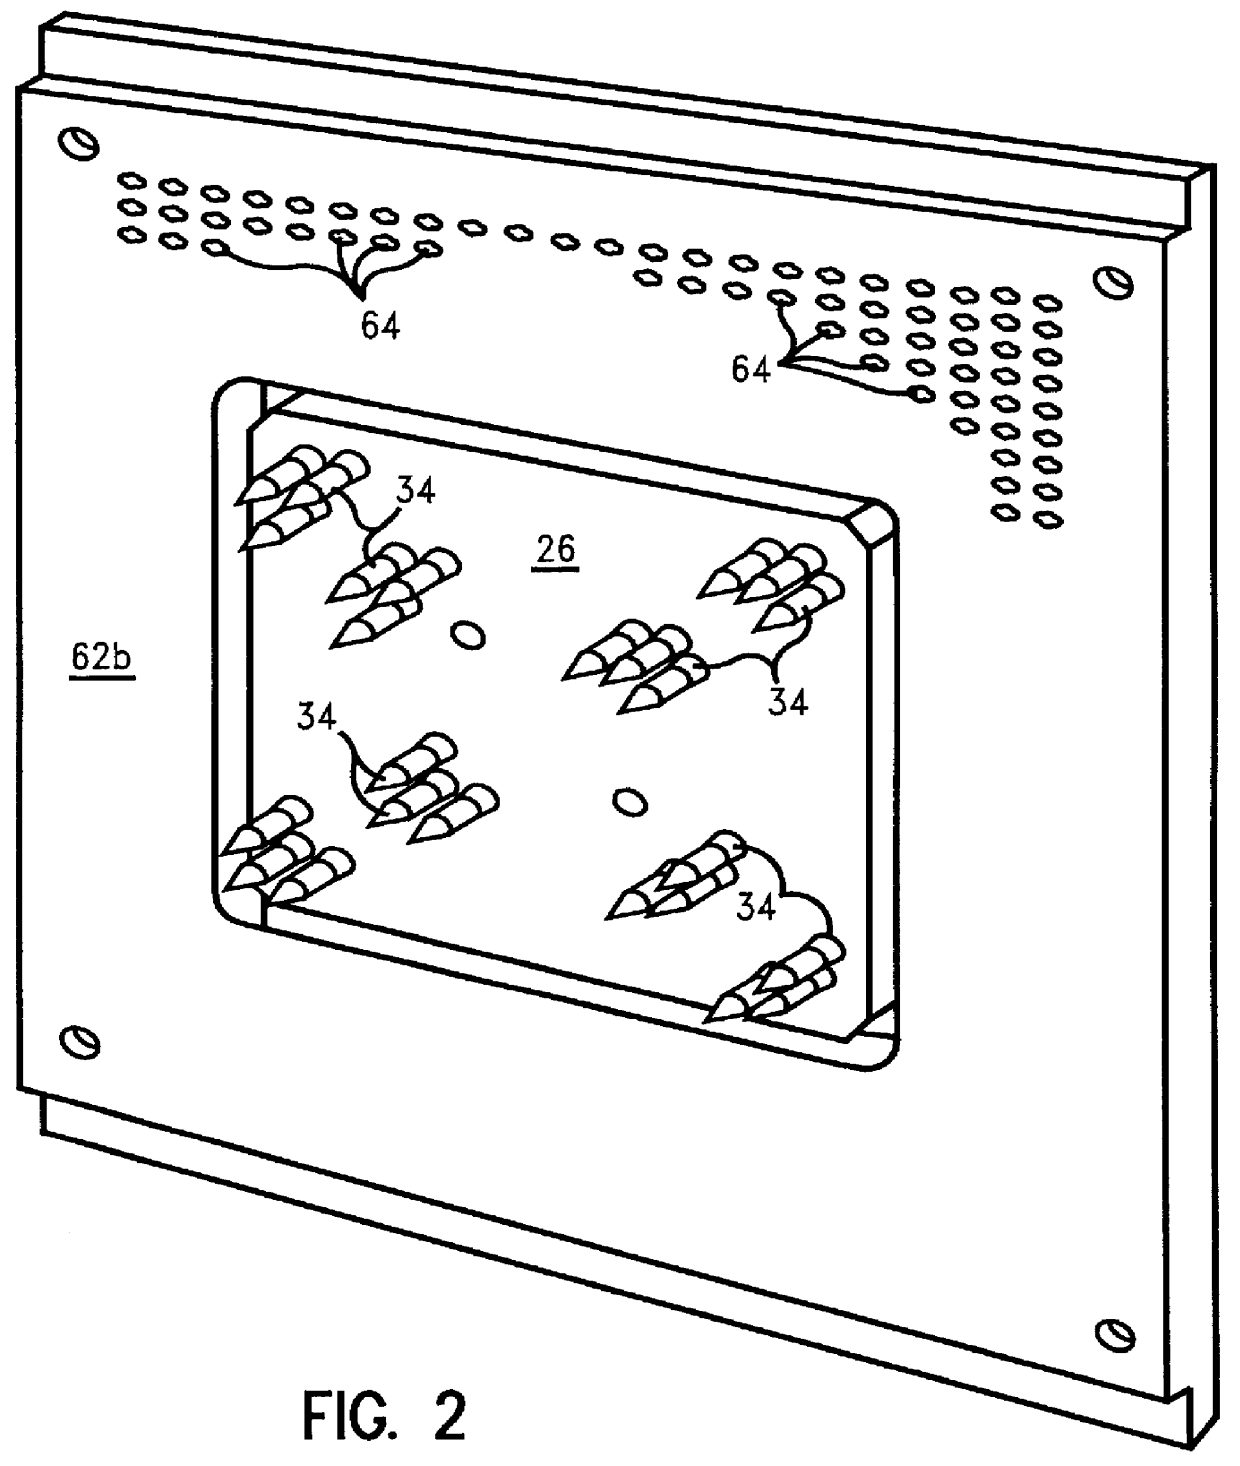 Multistage connector for carriers with combined pin-array and pad-array